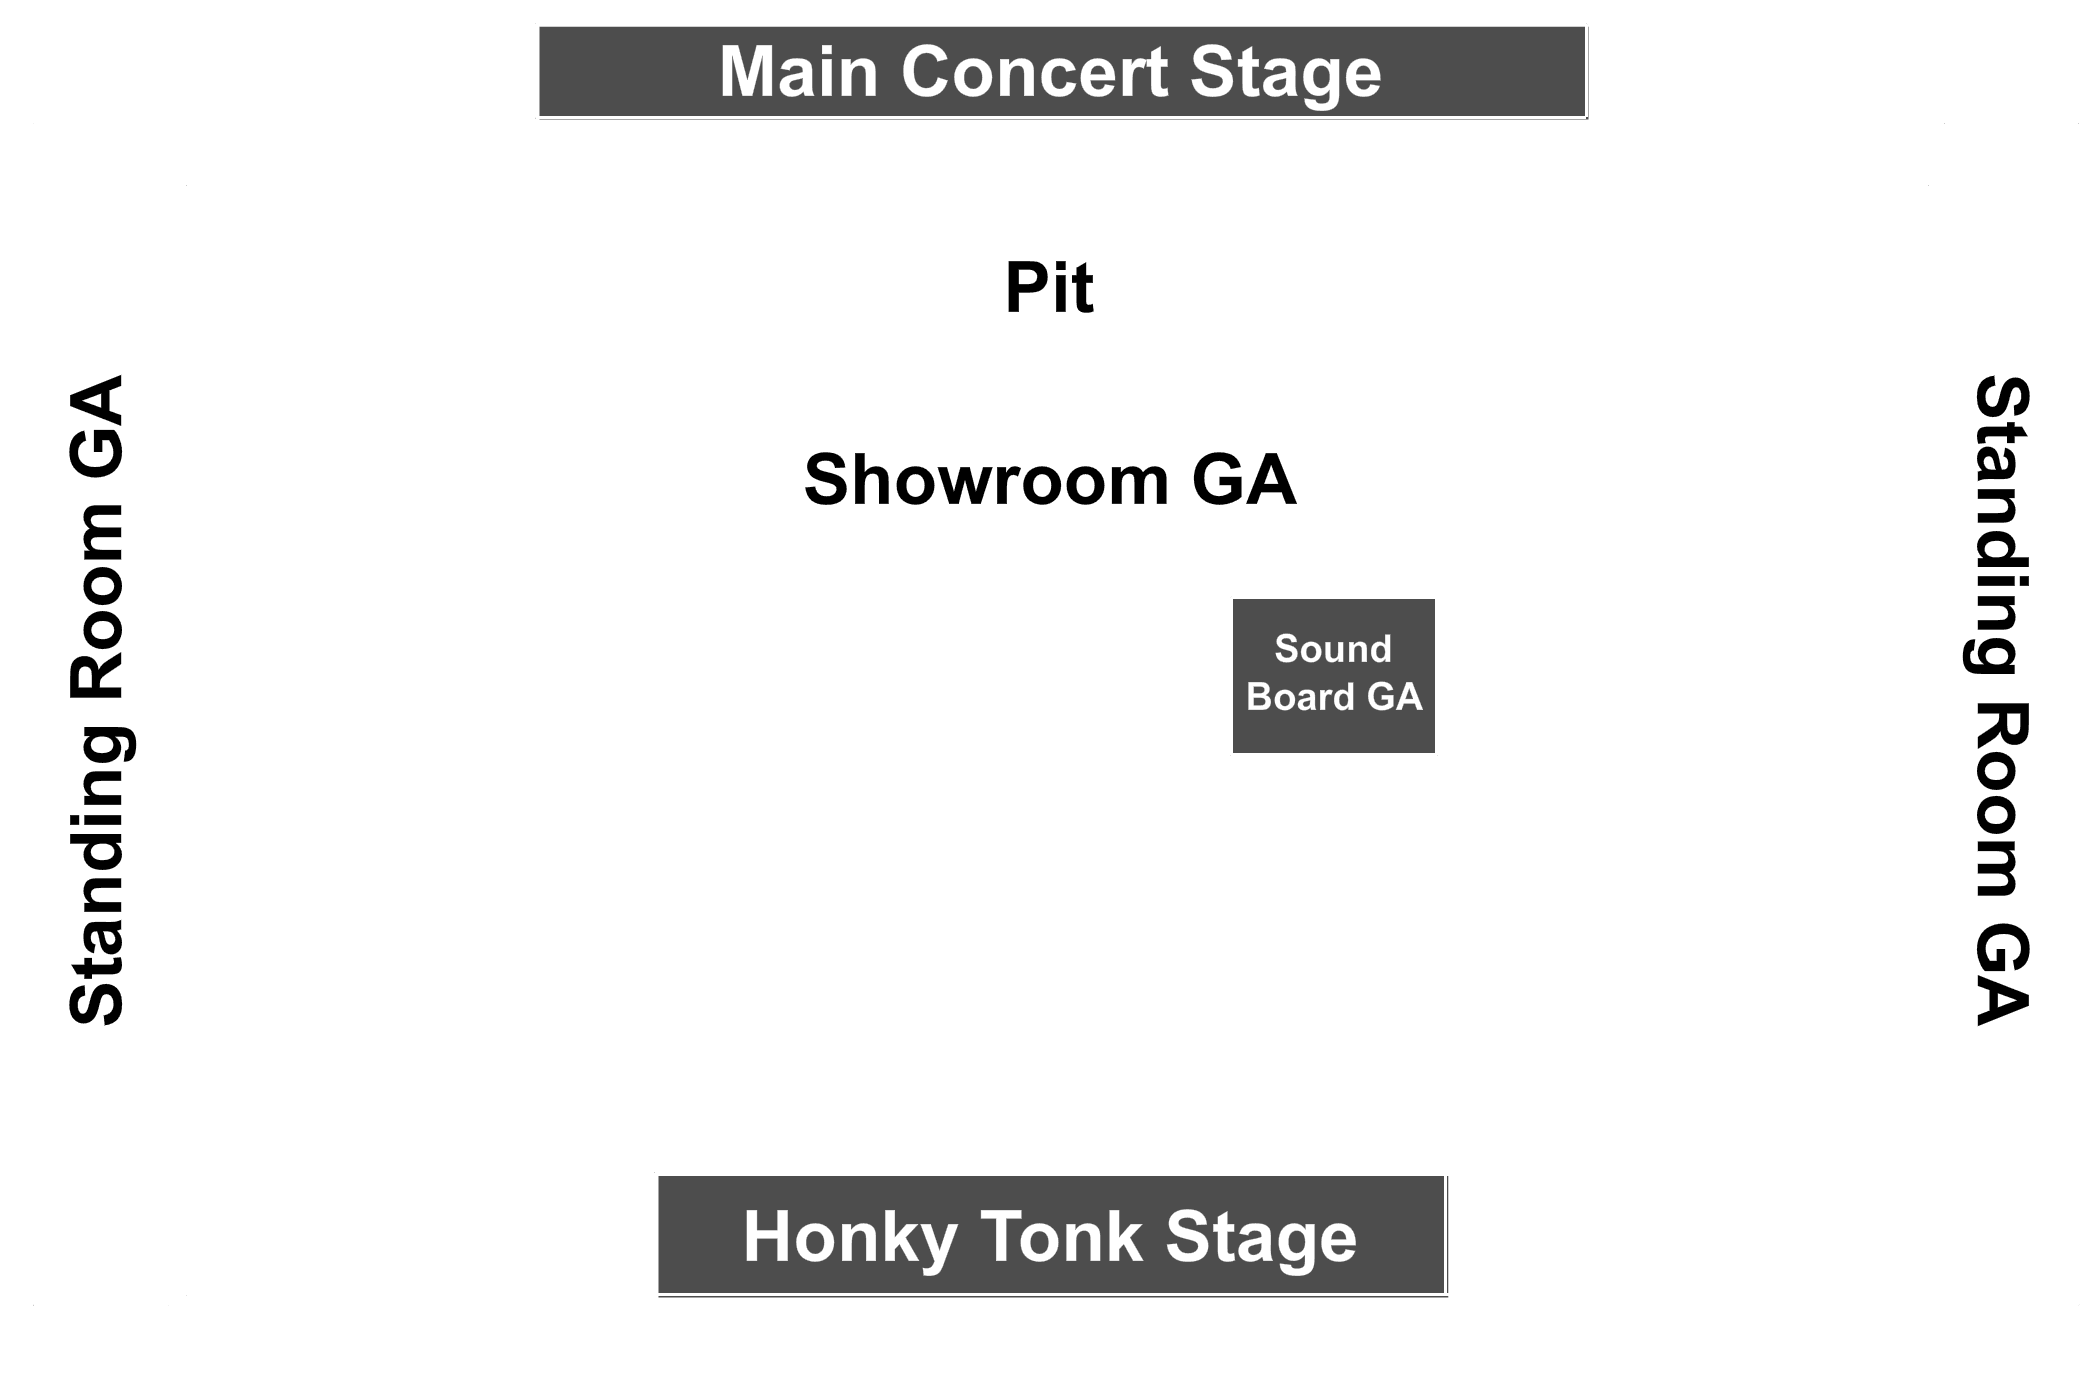 Billy Bob S Pit Seating Chart